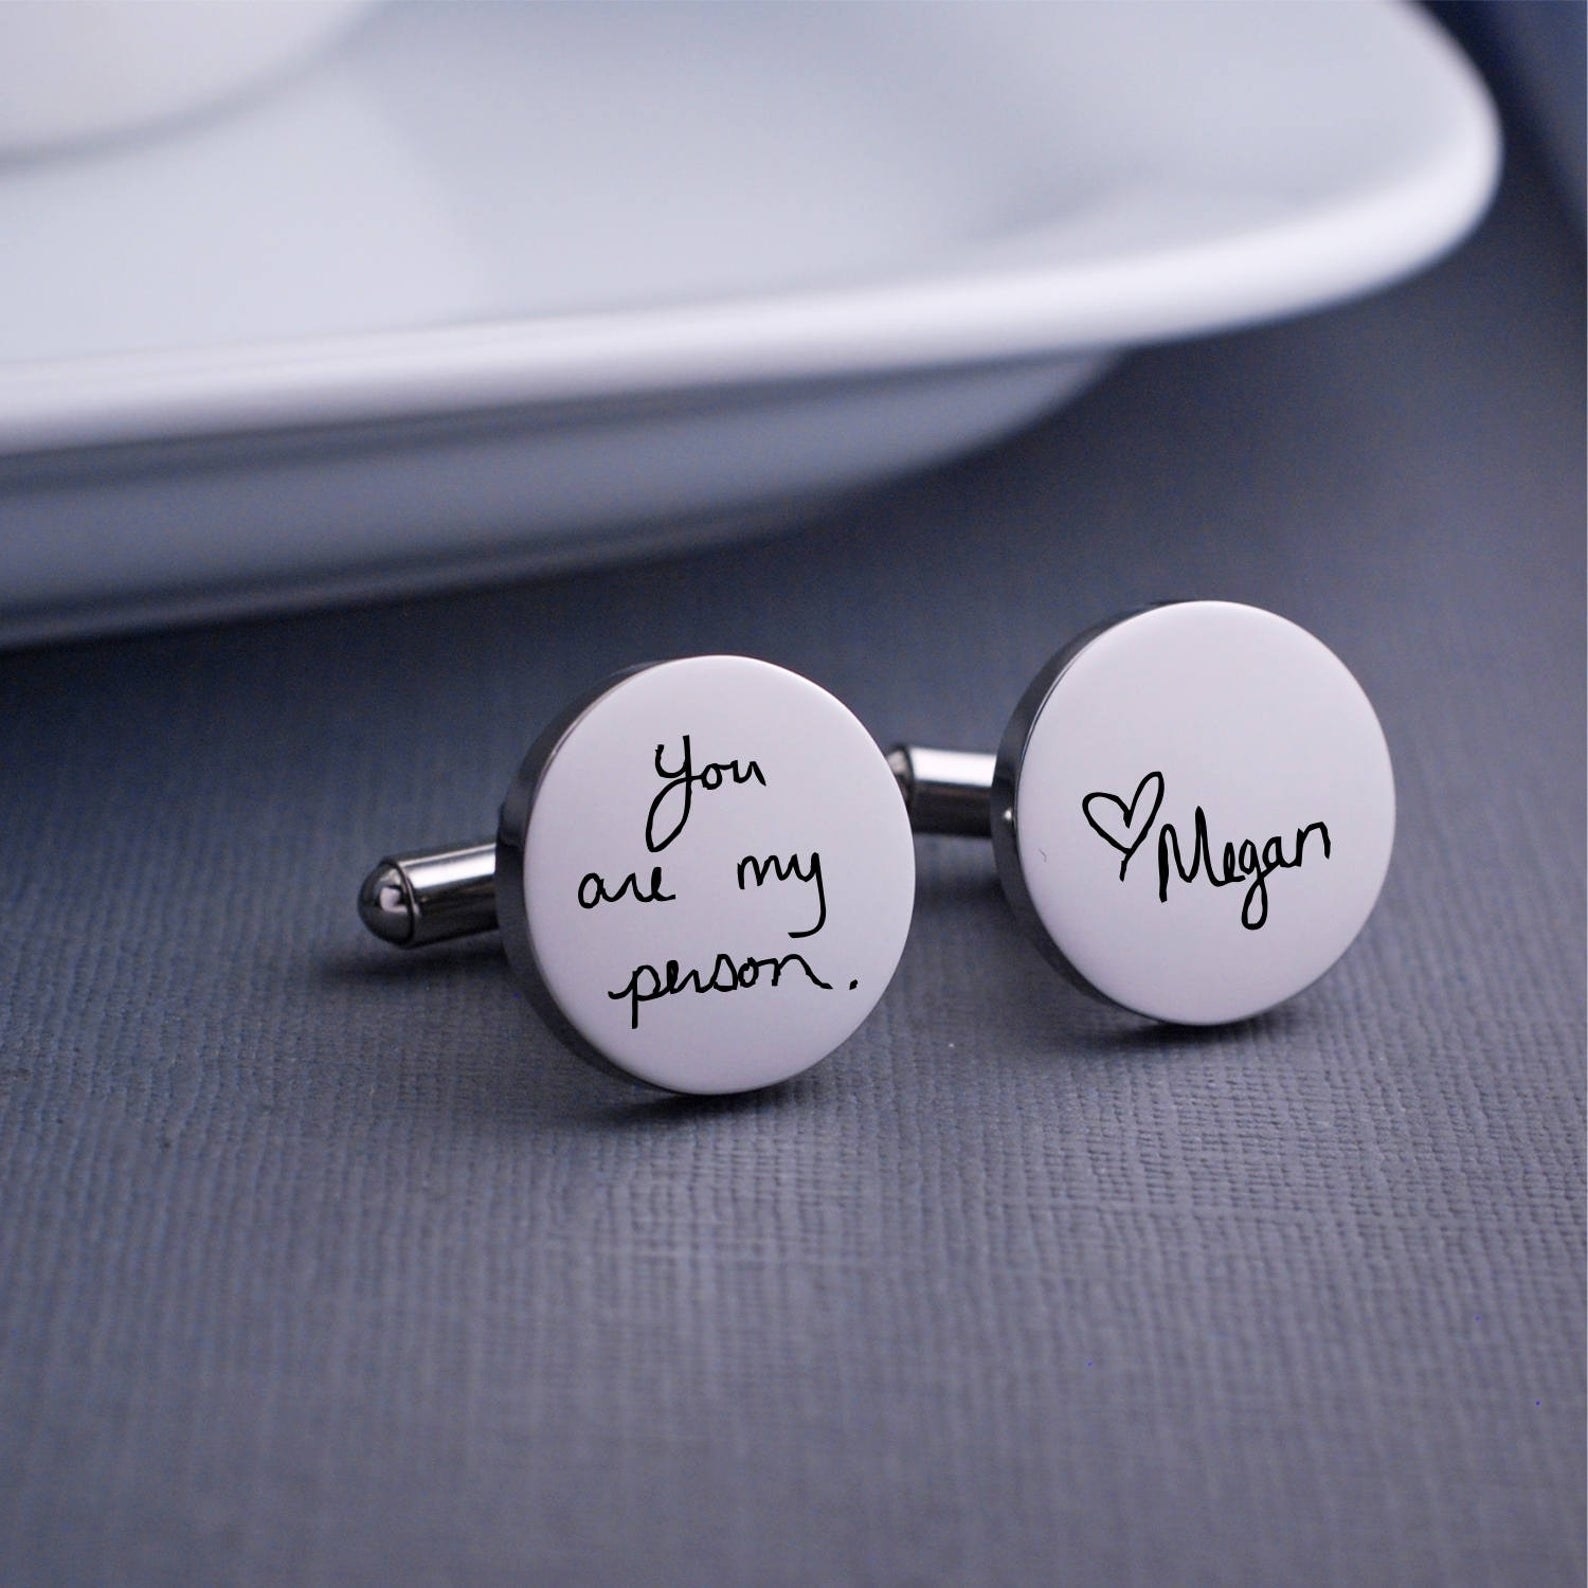 Silver cufflinks that say &quot;You are my person&quot; and &quot;Love Megan&quot;